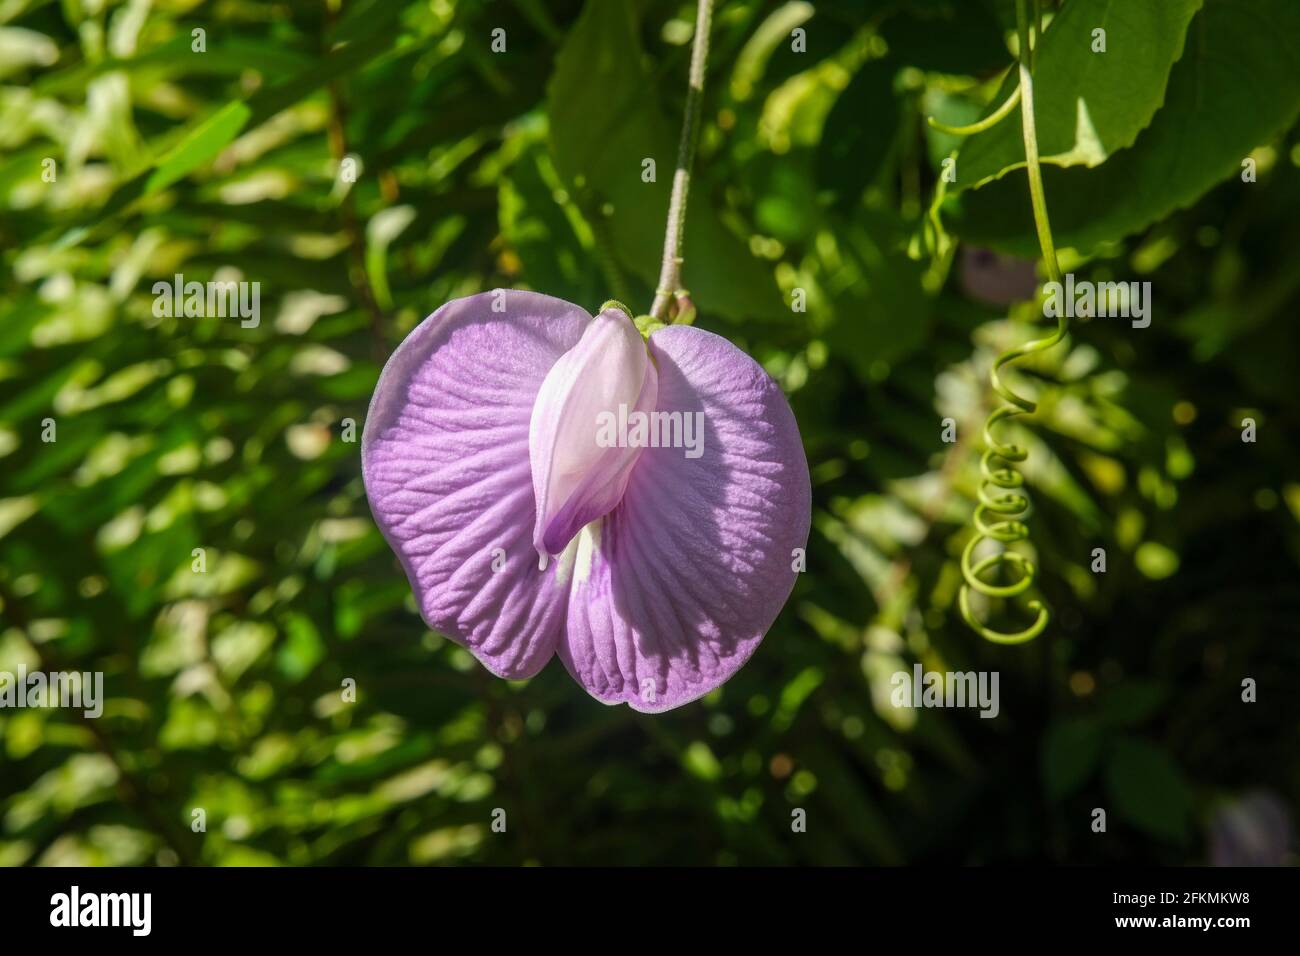 Centrosema virginianum flower, commonly called Spurred Butterfly Pea Stock Photo